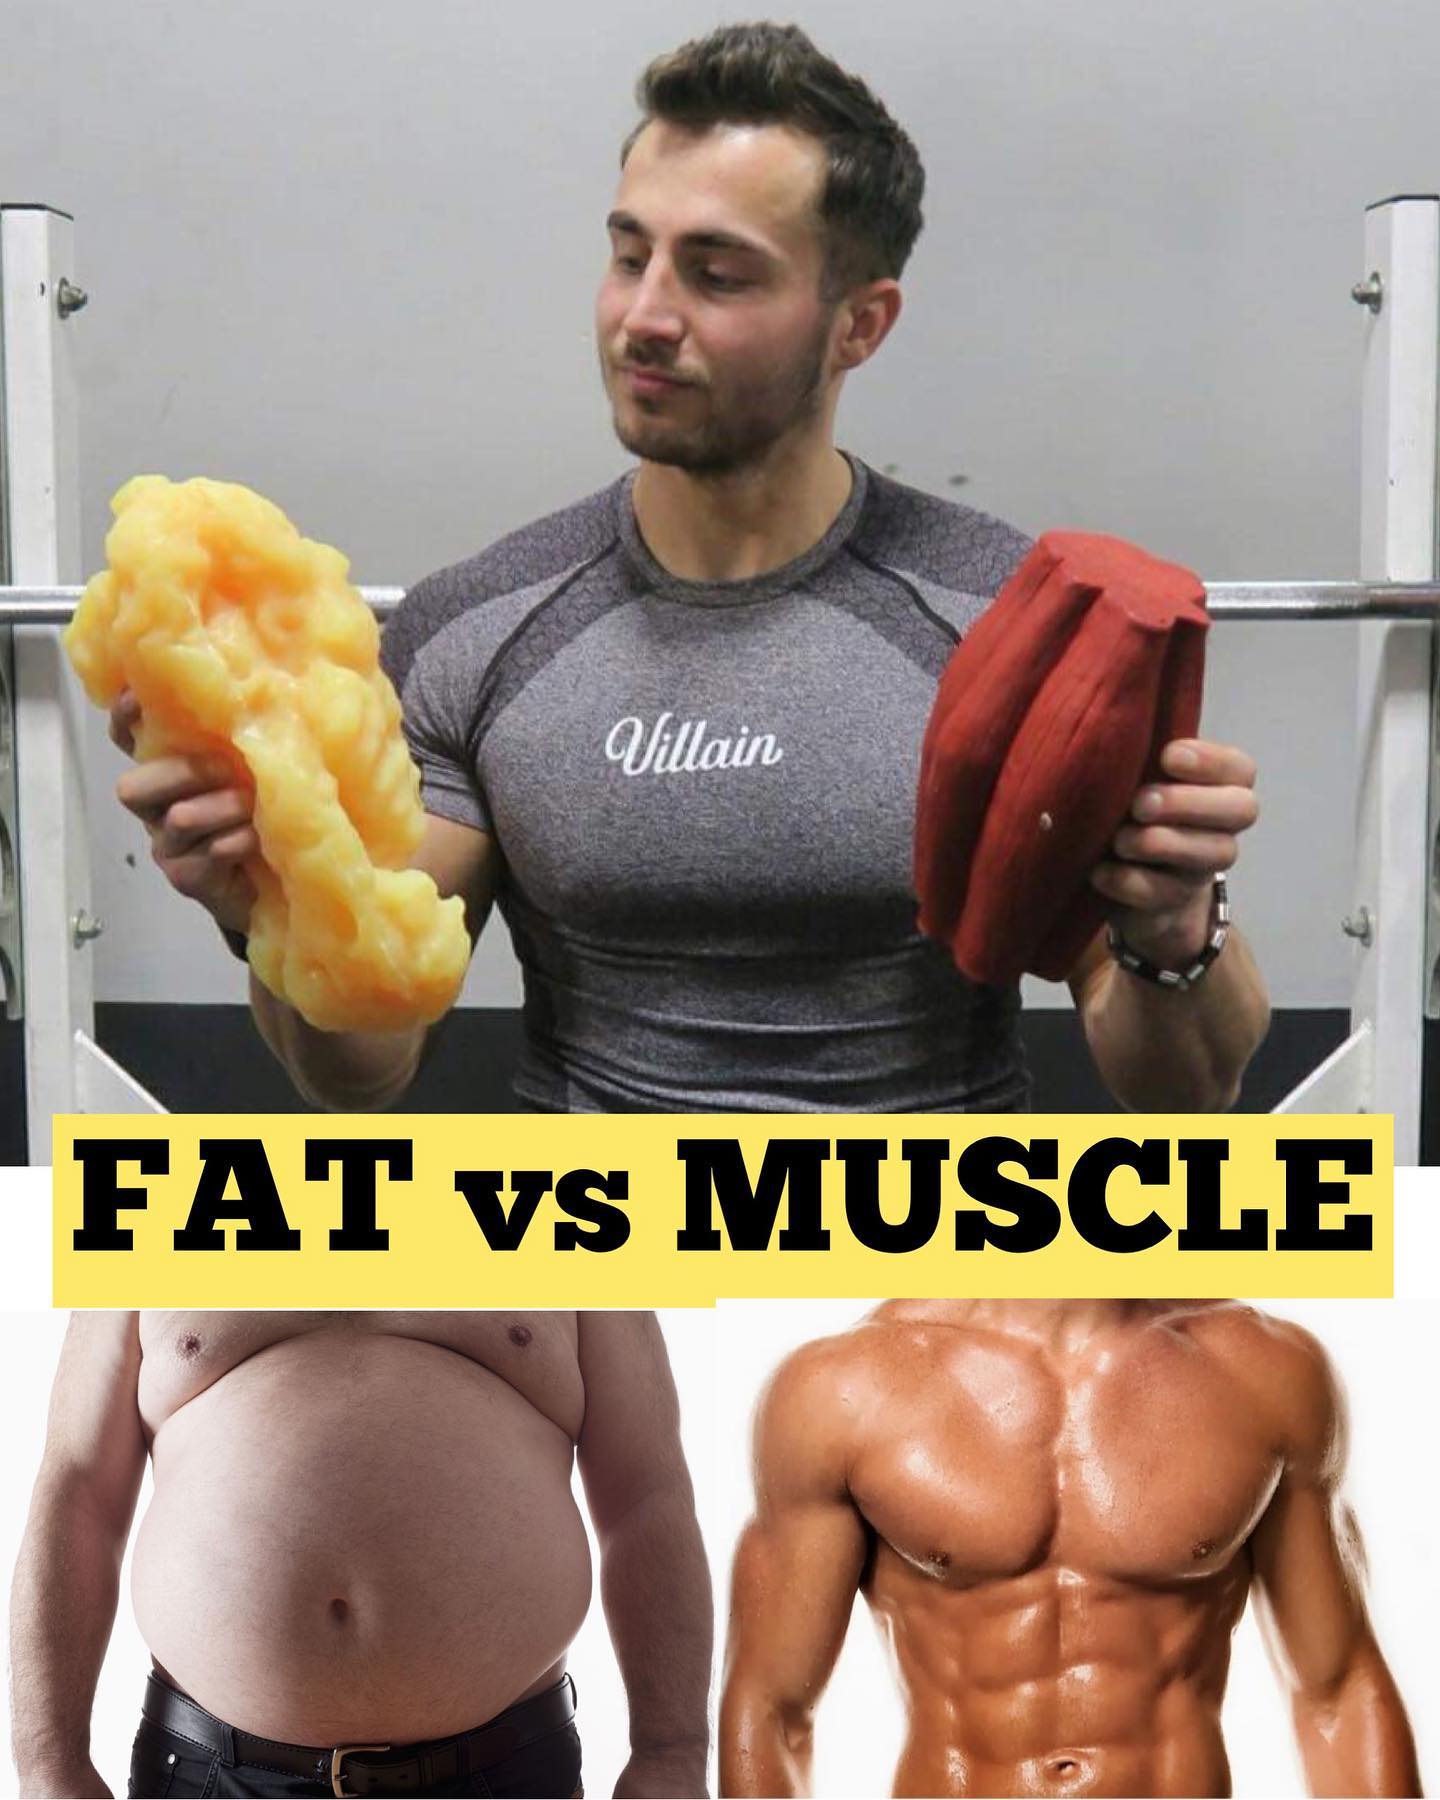 The difference between fat and muscle